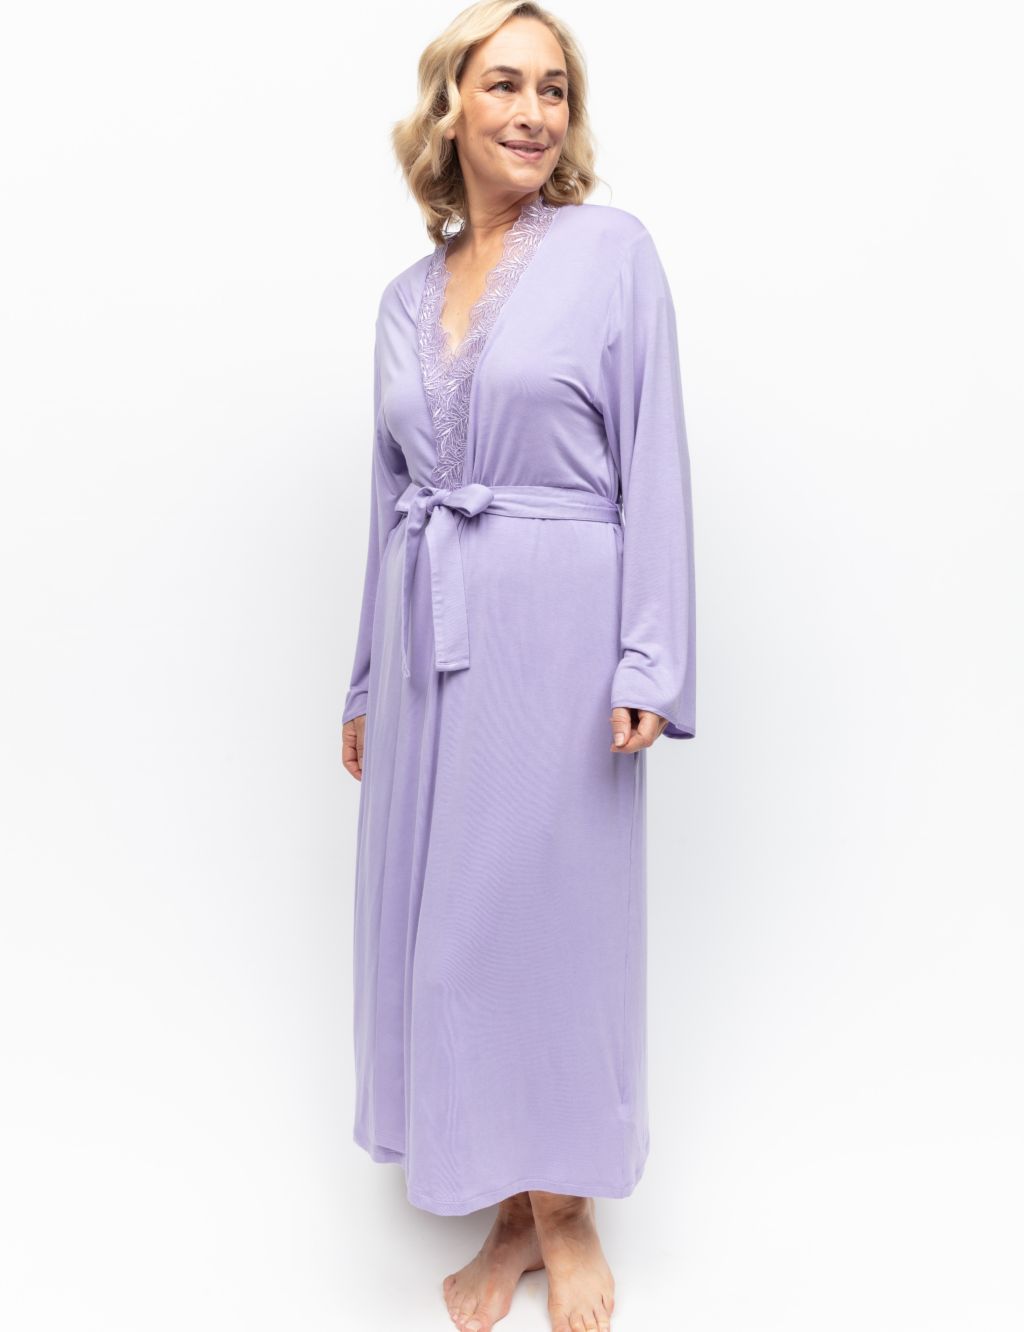 Jersey Lace Trim Dressing Gown